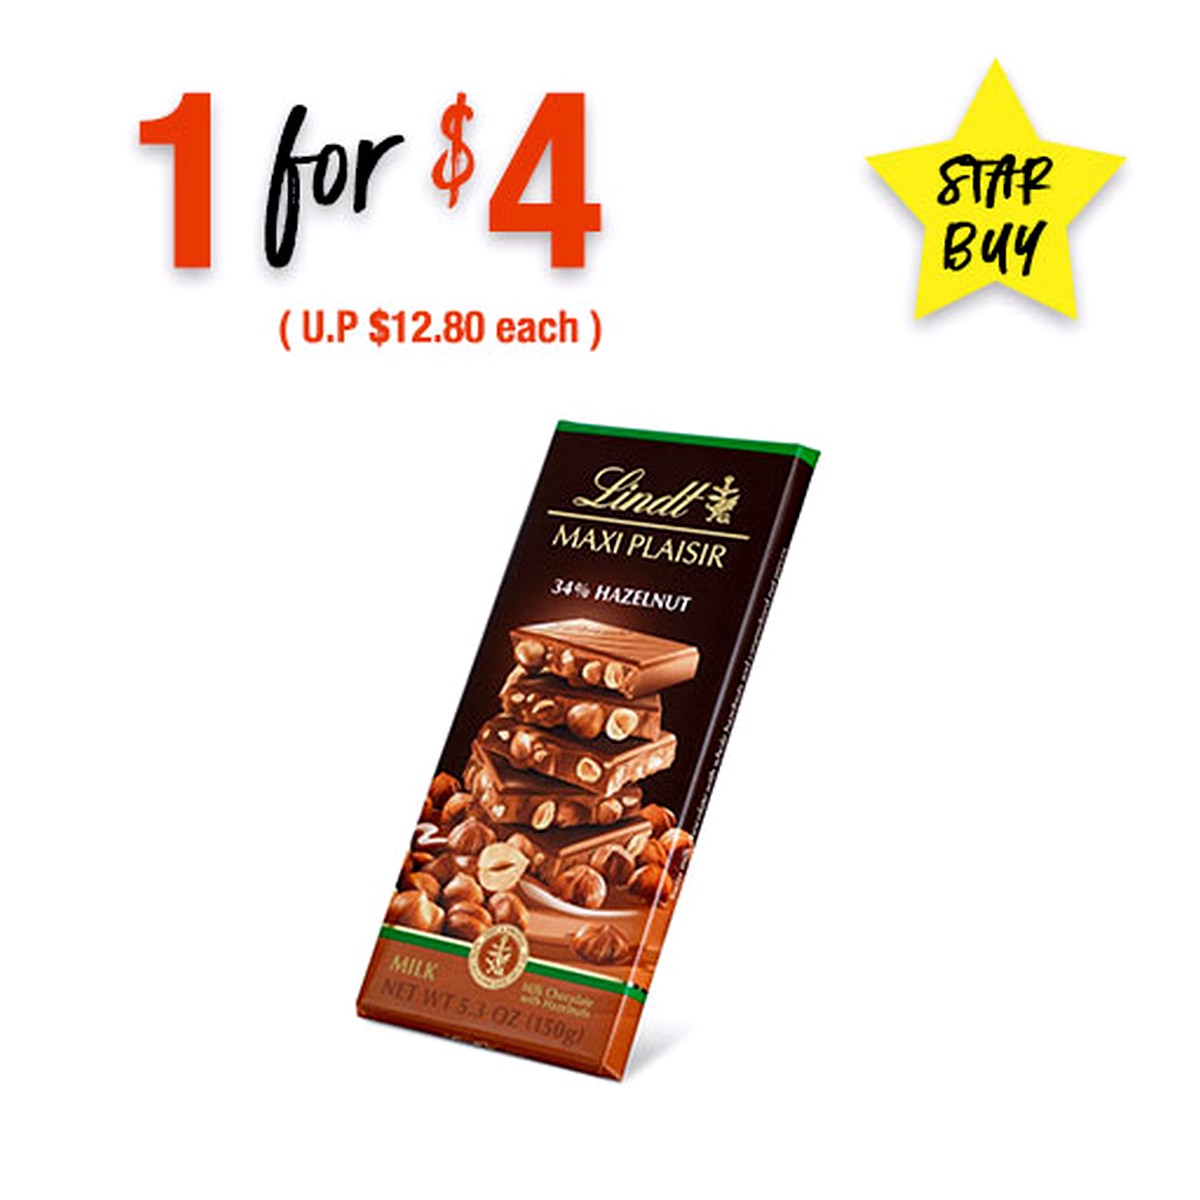 15-4379961_sb_1 8 Apr-31 May 2020: The Cocoa Trees Online Mega Sale! Up to 80% off Chocolates & Snacks!